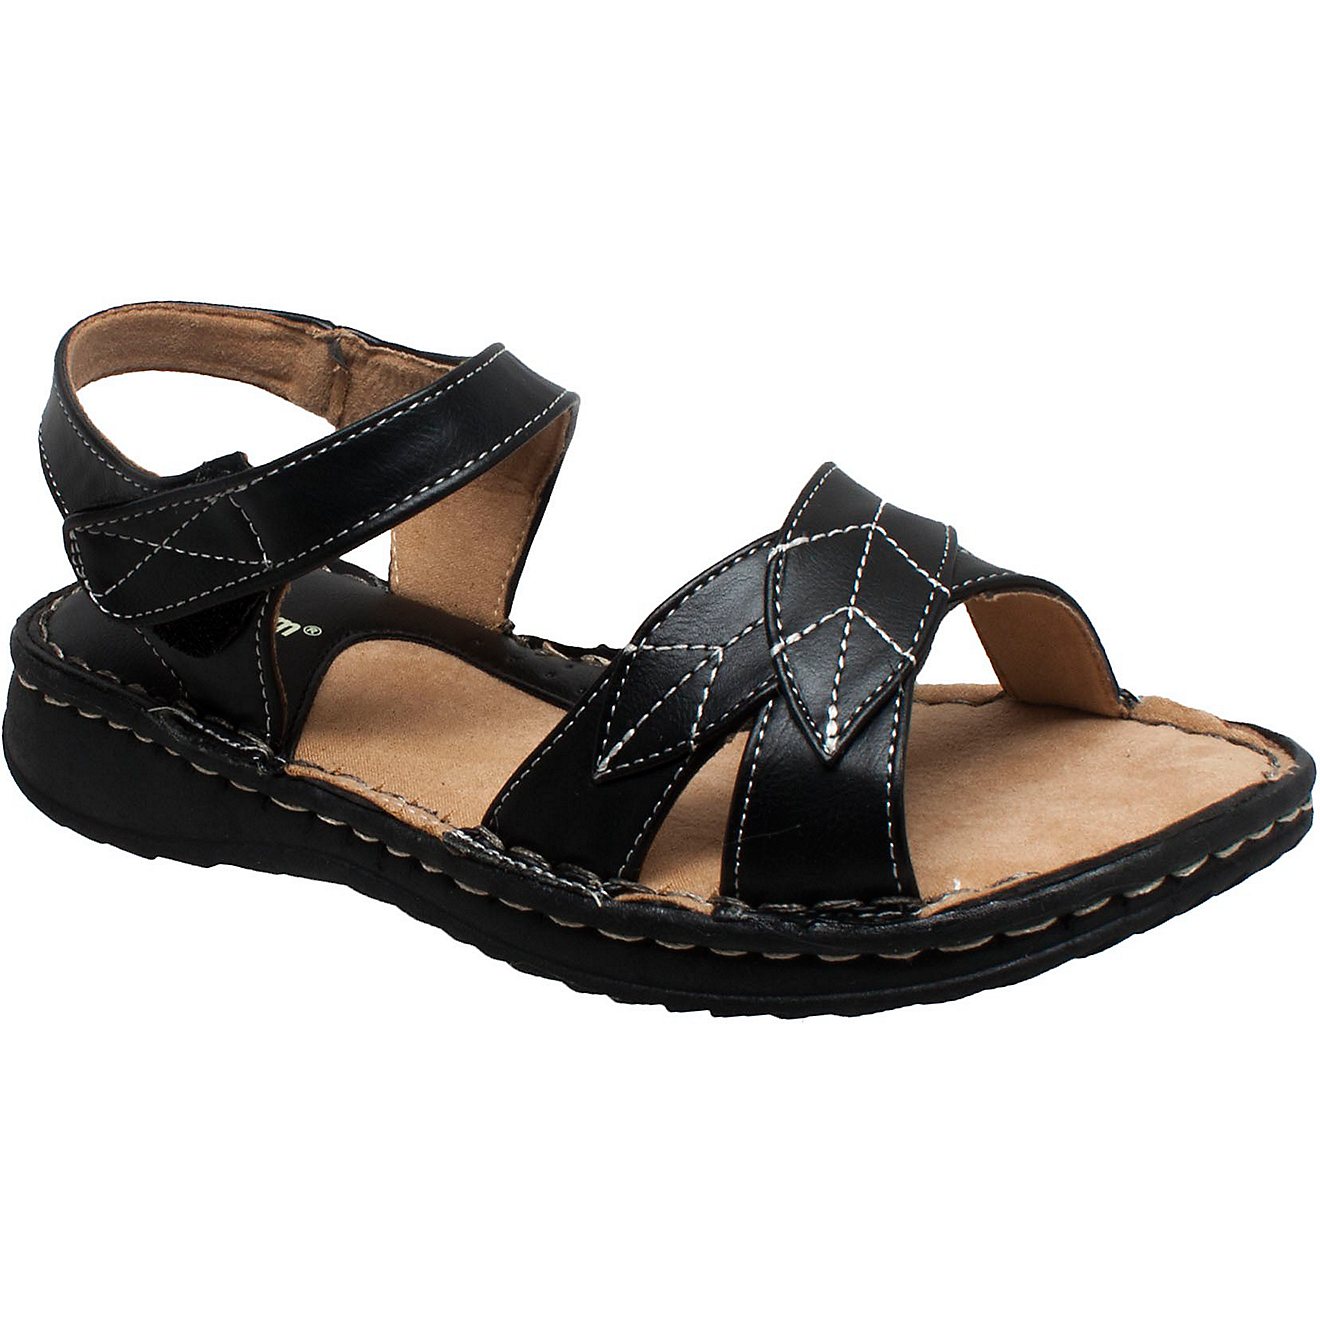 Shaboom Women's Comfort Sandals | Free Shipping at Academy